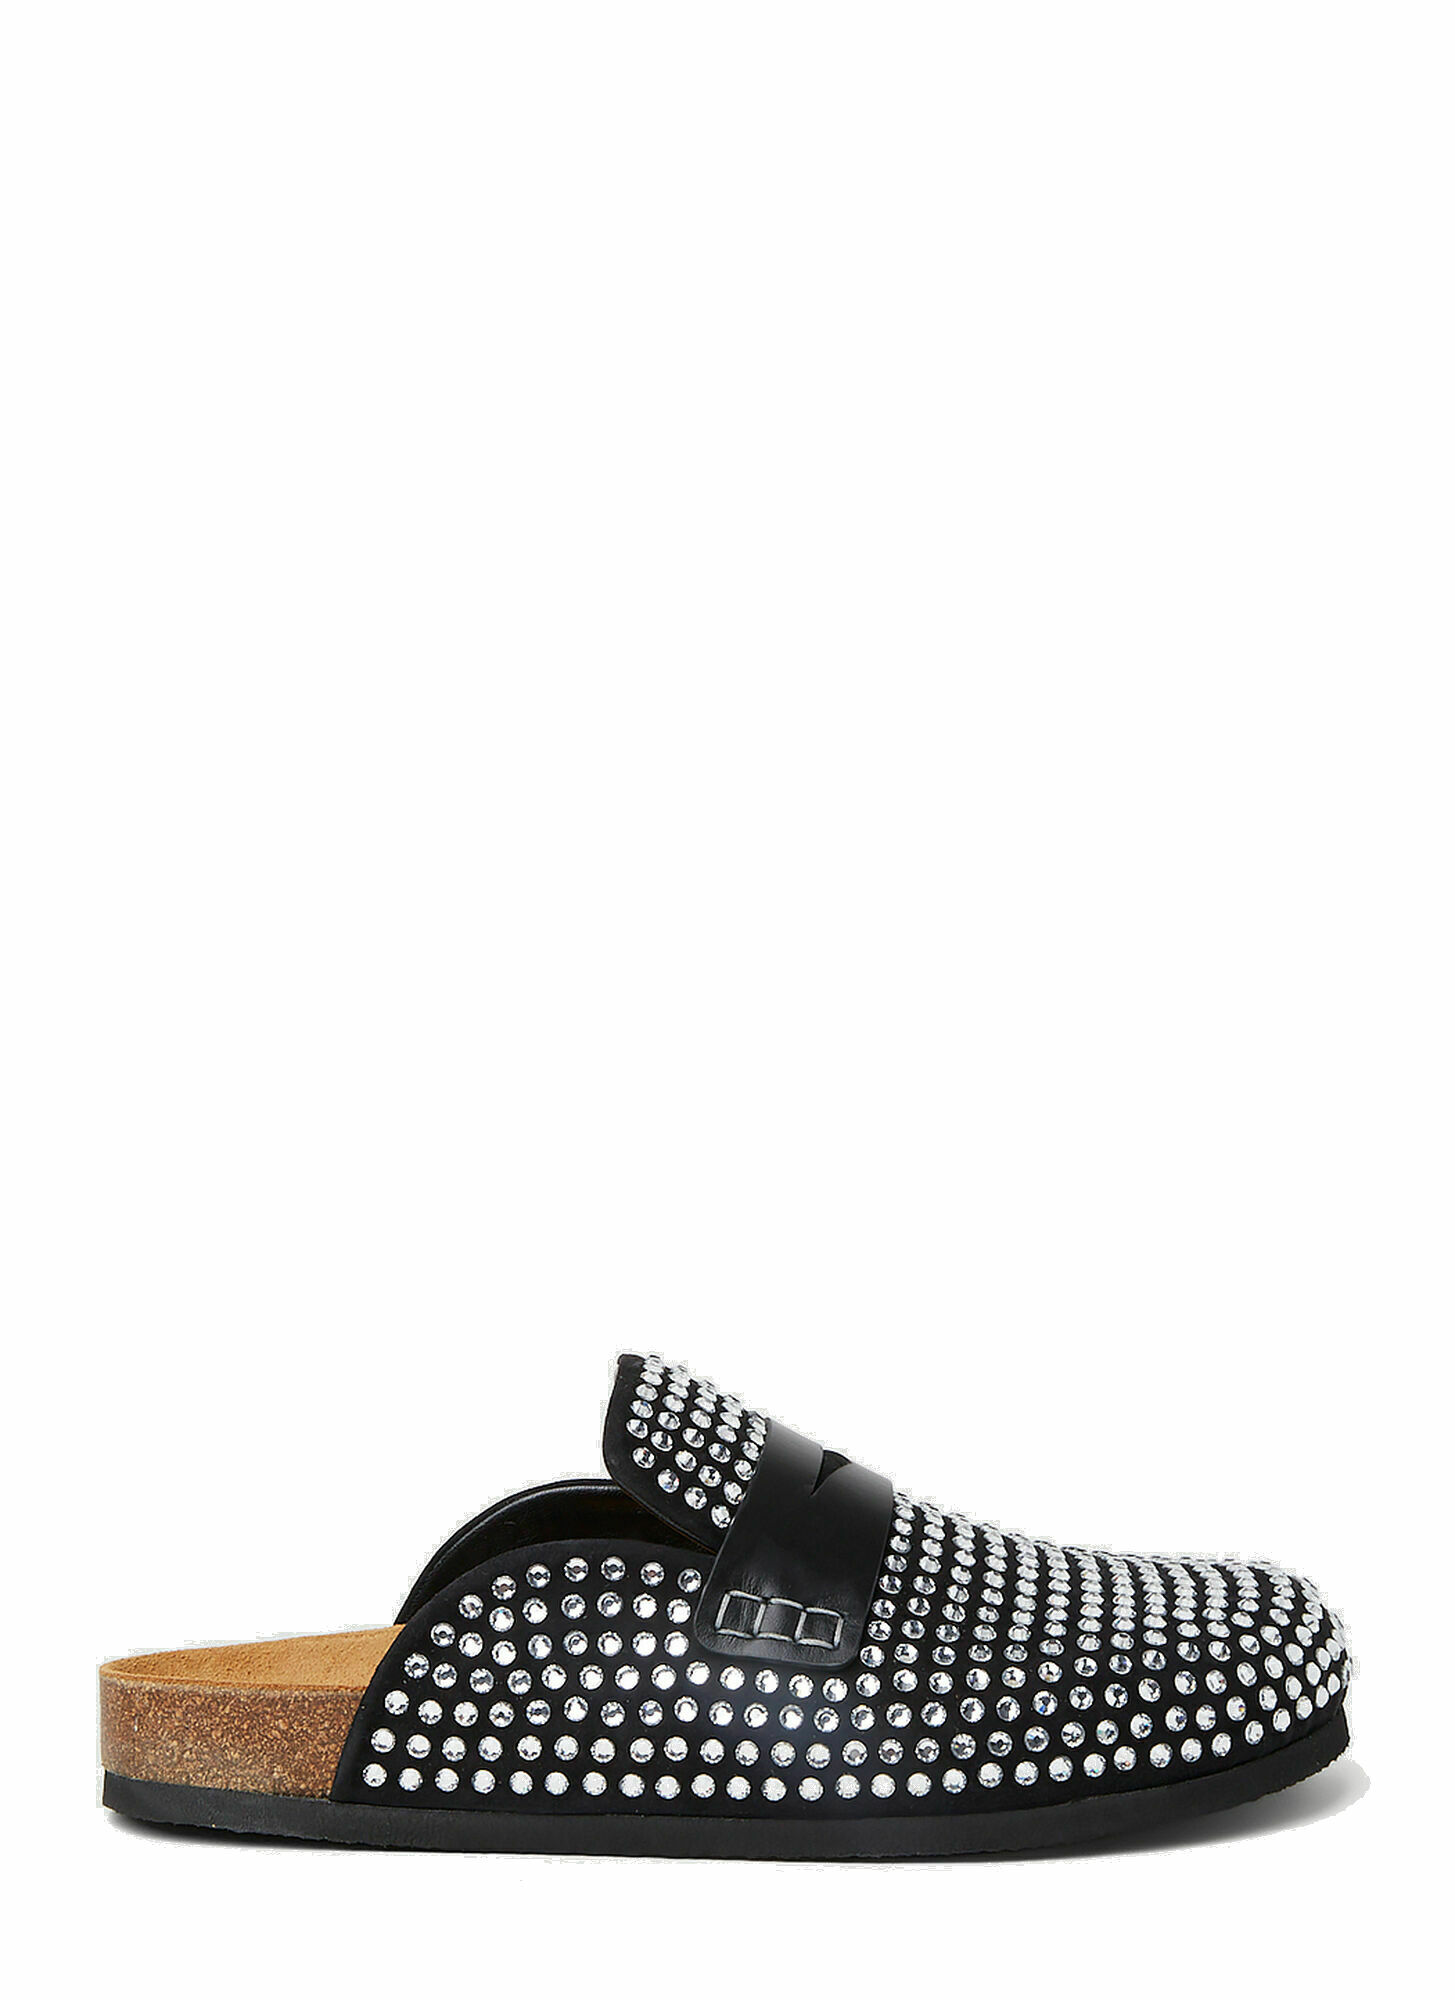 JW Anderson - Crystal Backless Penny Loafers in Black JW Anderson